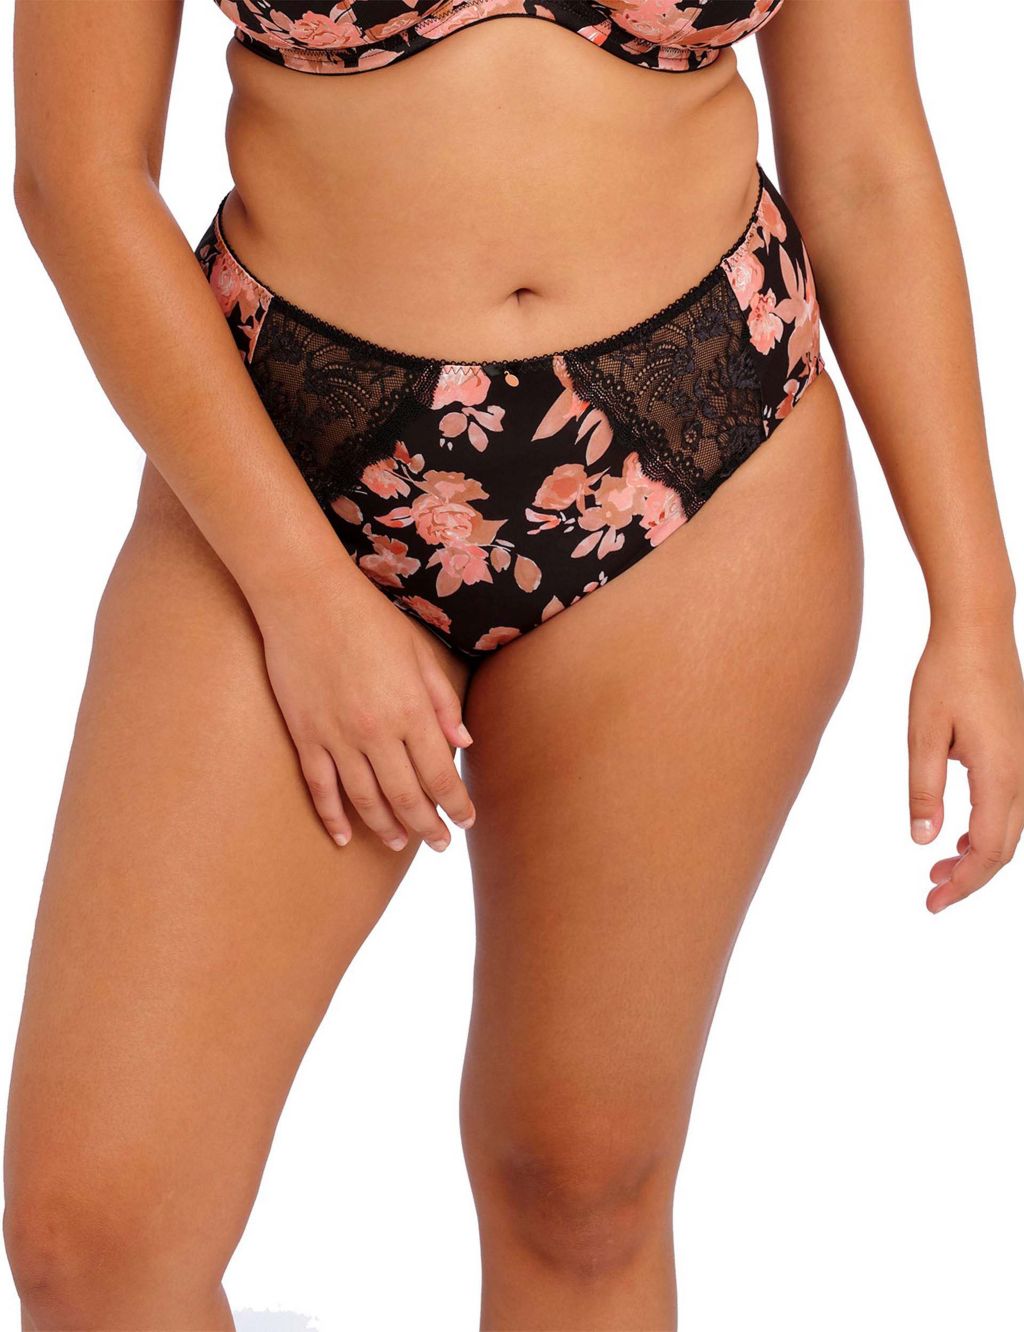 Morgan Floral Lace Full Briefs image 1